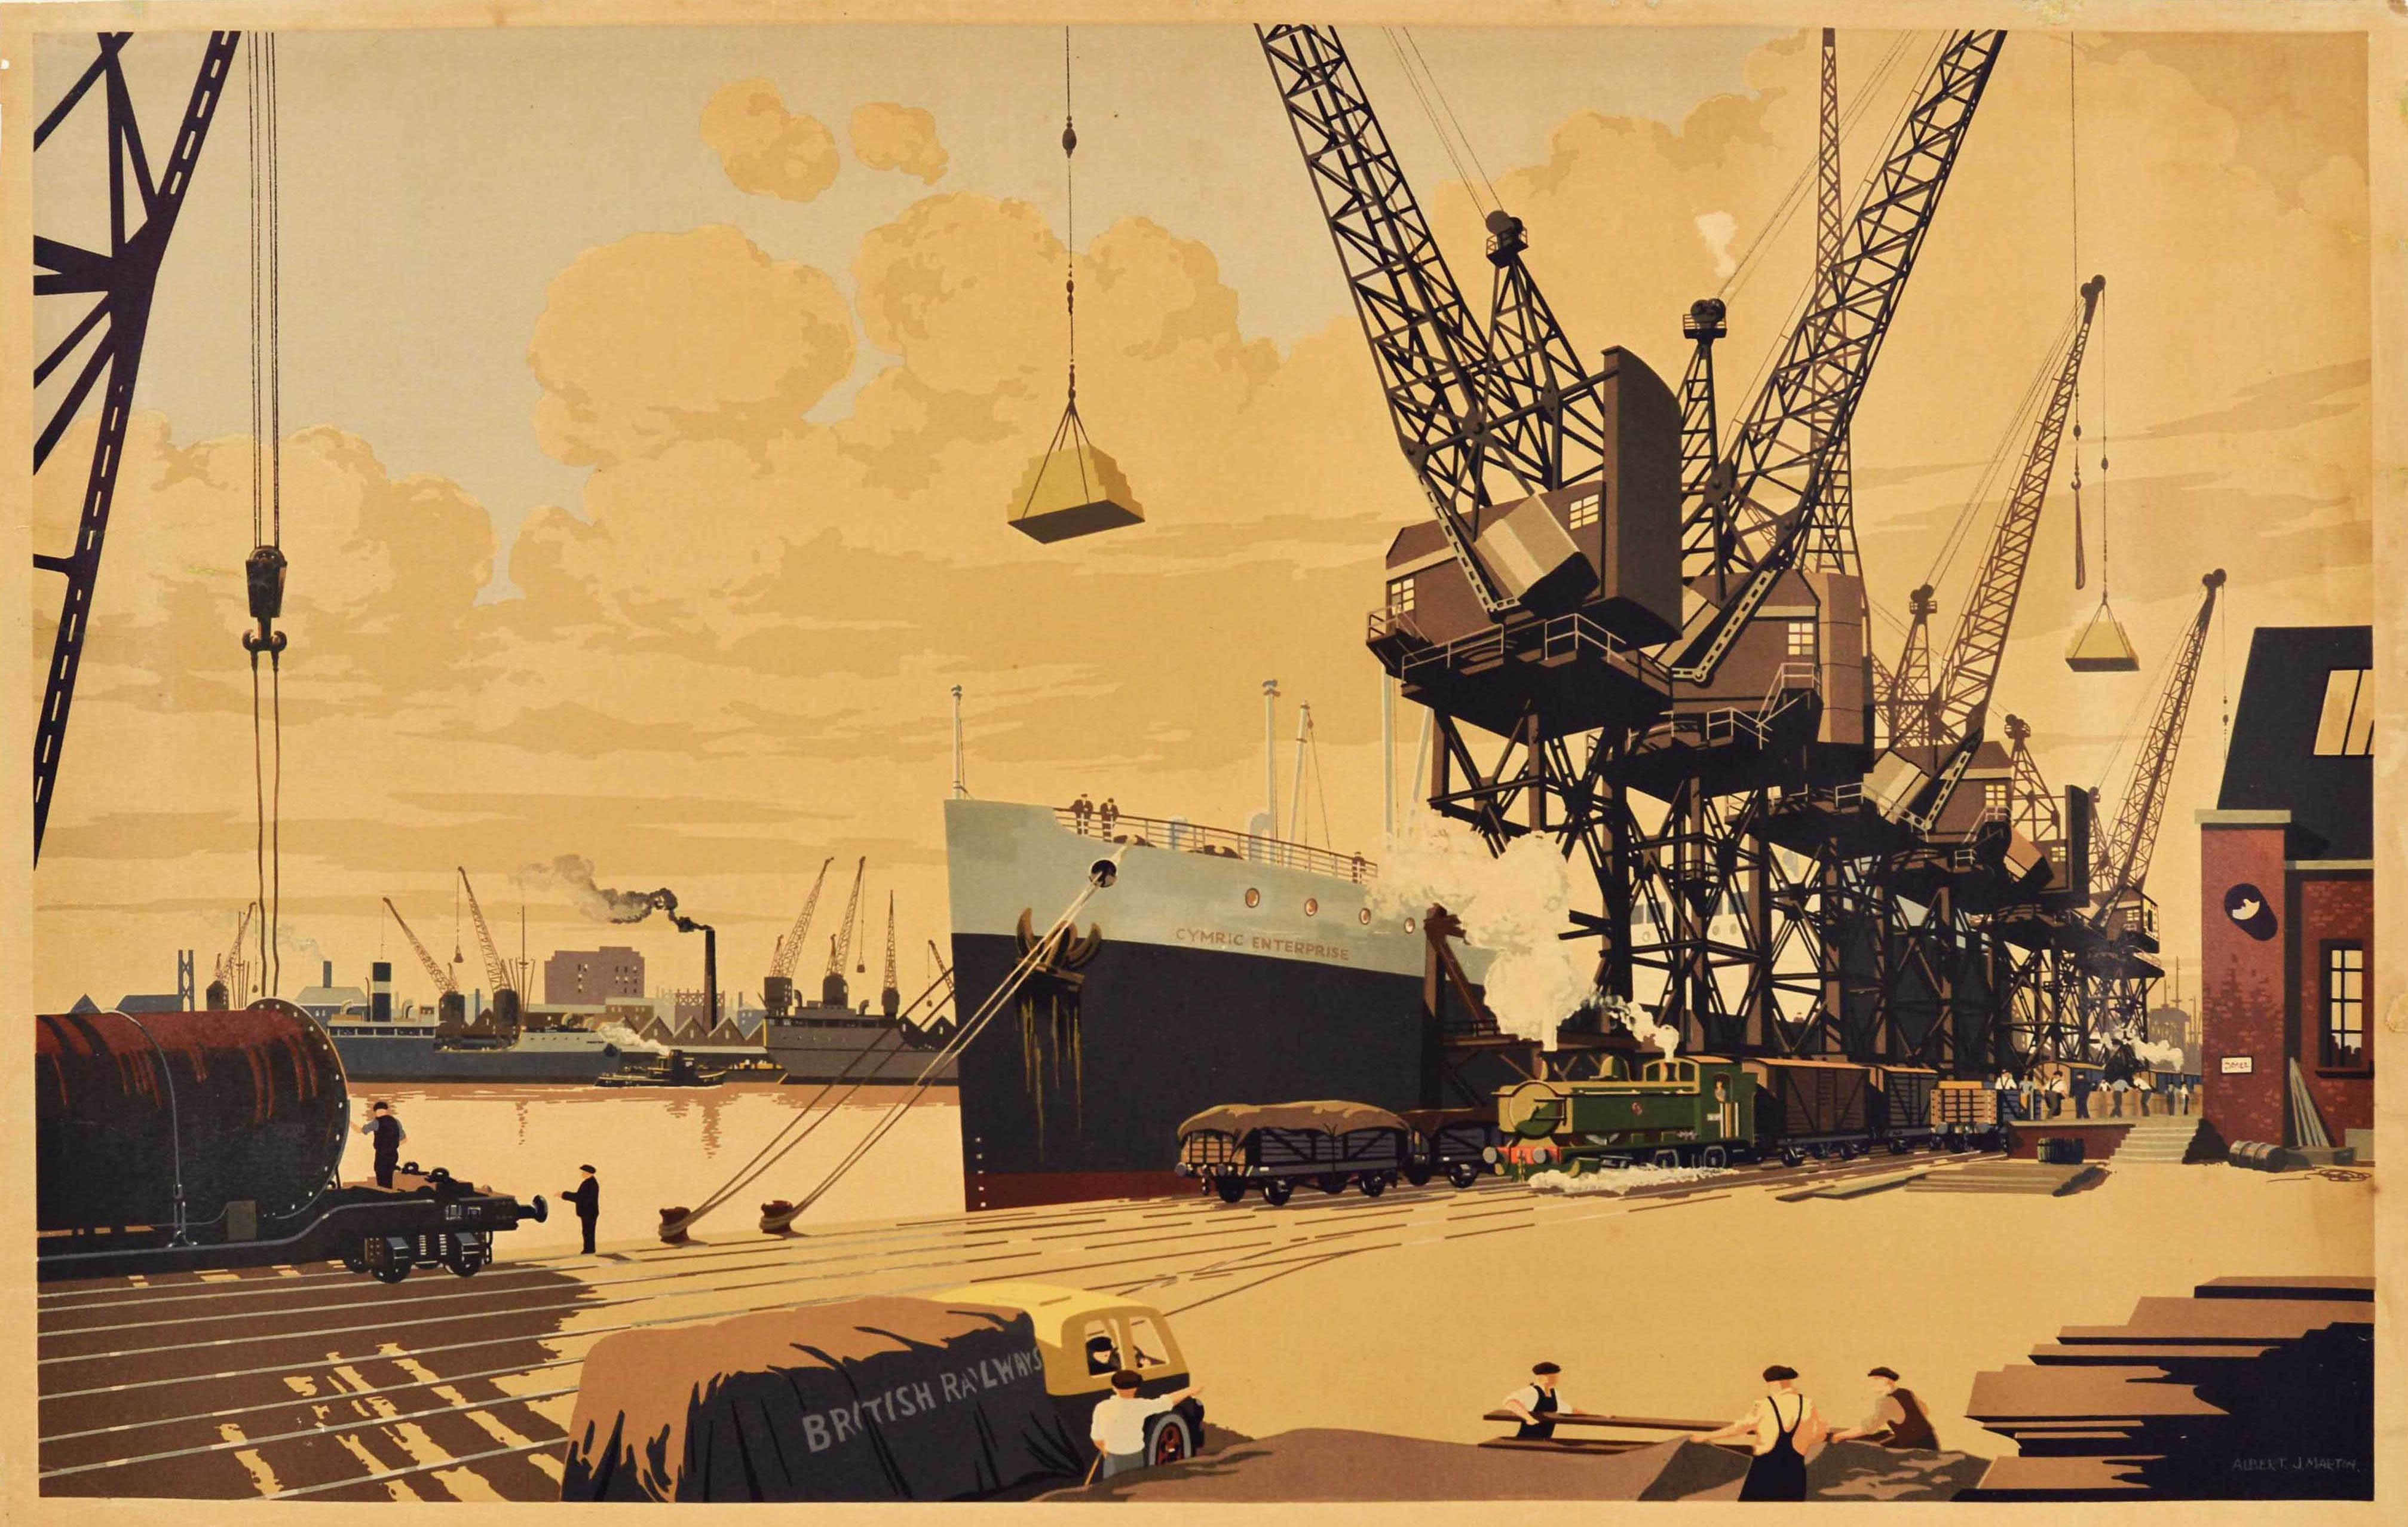 Original vintage poster - South Wales Docks For Quick Despatch - featuring a busy scene at the docks with cranes hauling crates and boxes from a ship named the Cymric Enterprise moored alongside, dock workers, a British Railways van, a cargo steam